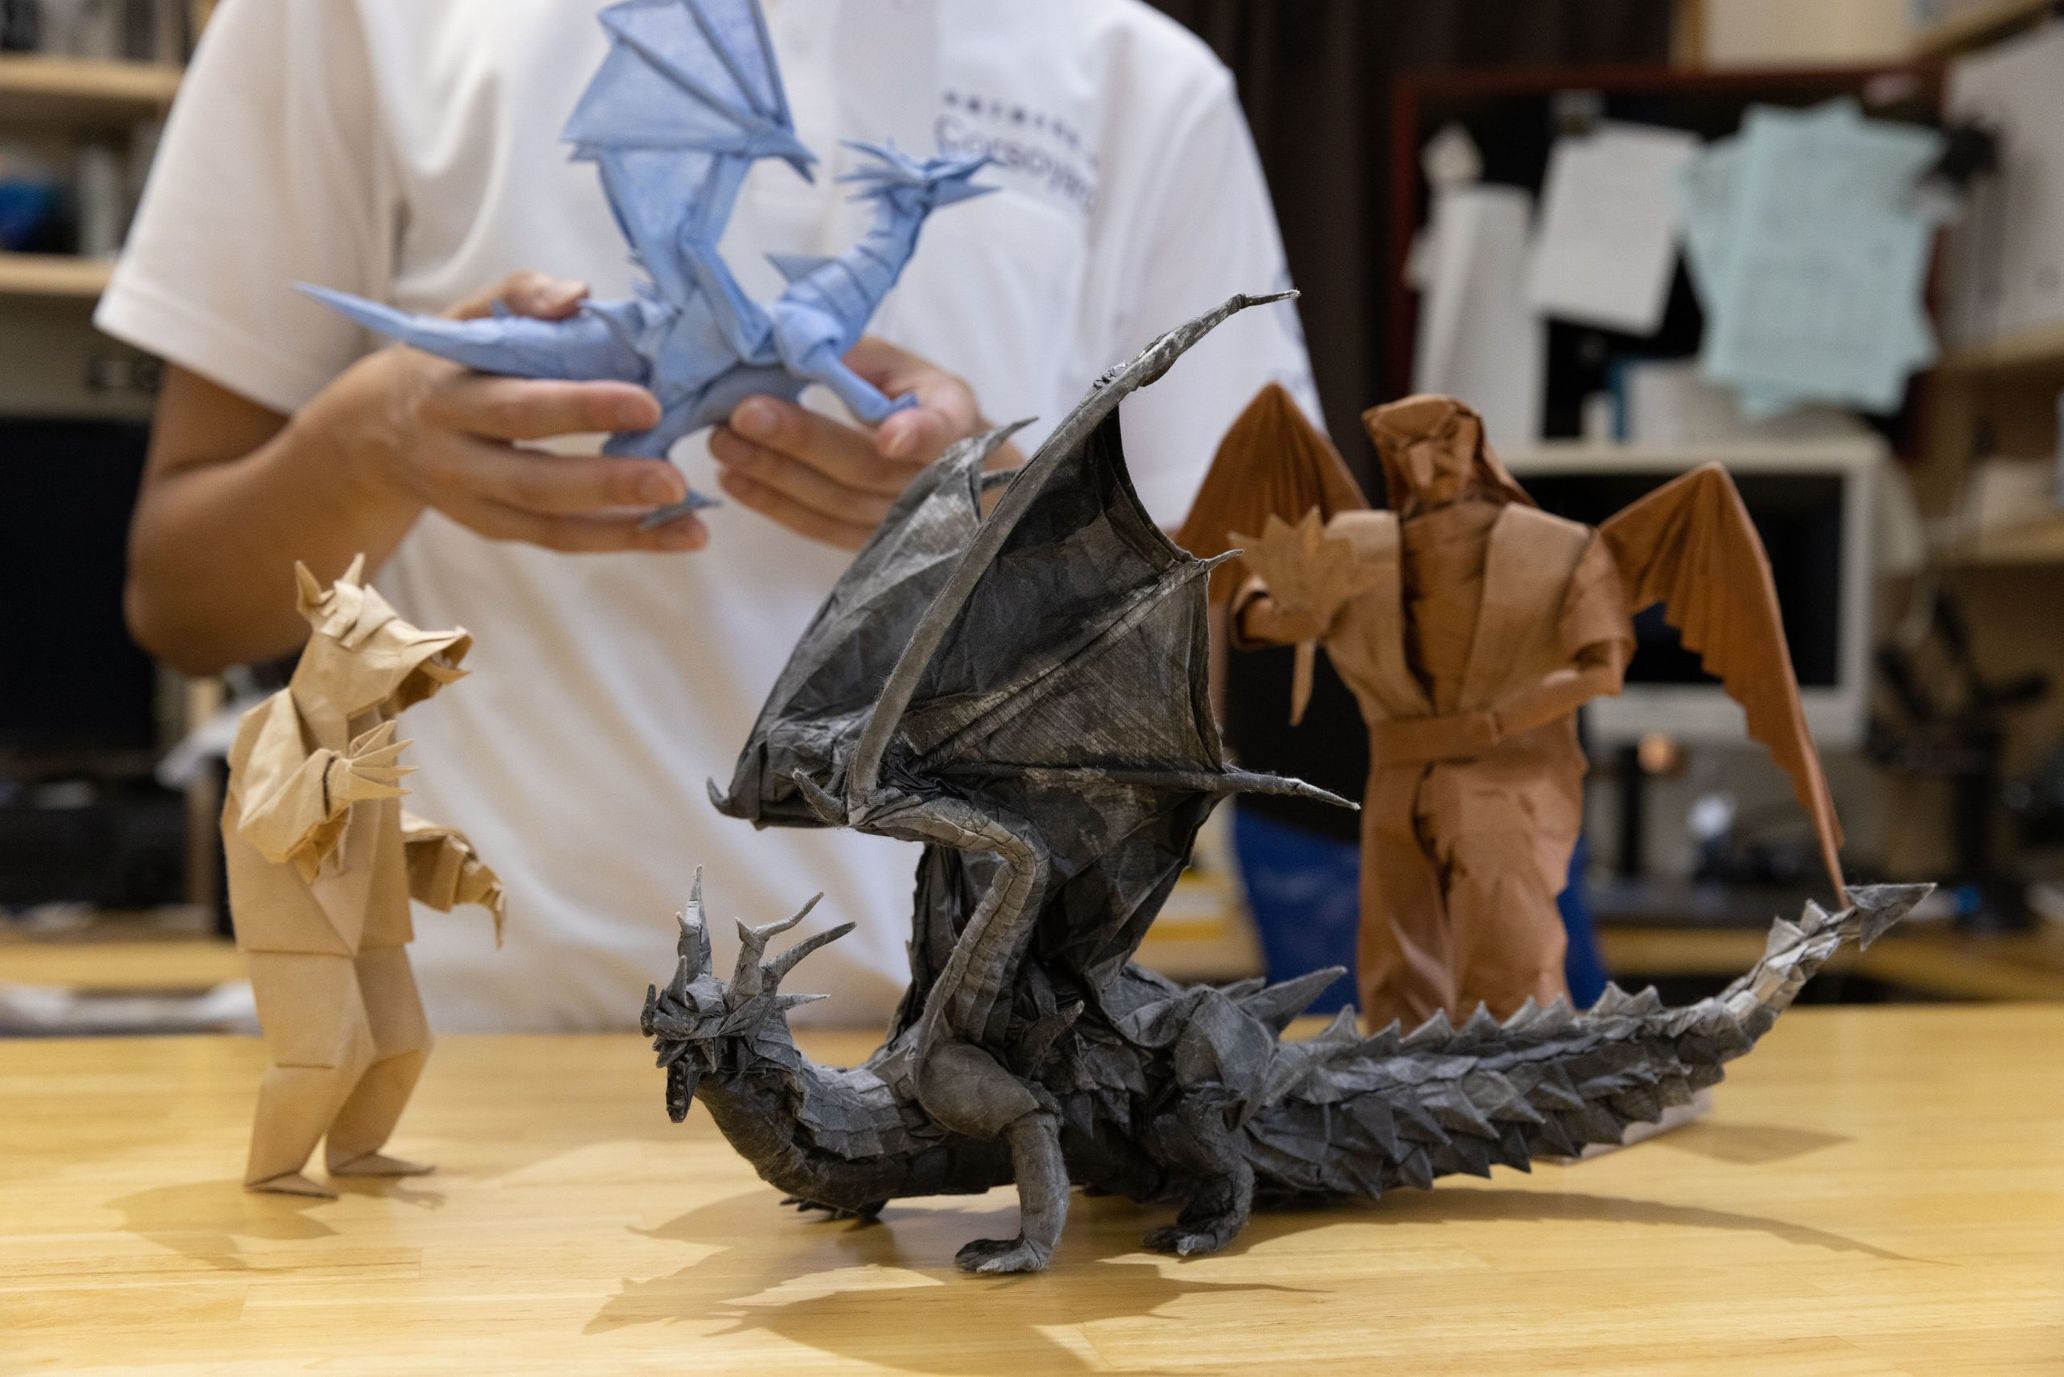 Representative works by Yuga Arisawa. (Clockwise from center front) “IBUKI” (2018), “Horse Man” (2015/improved ver.), “Azul Dragon” (2016/improved ver.) “Tengu” on the far right is his latest work, and is the subject of a new book, Origami Oji No Sugo Waza! Origami Japonism (October 16, 2022).